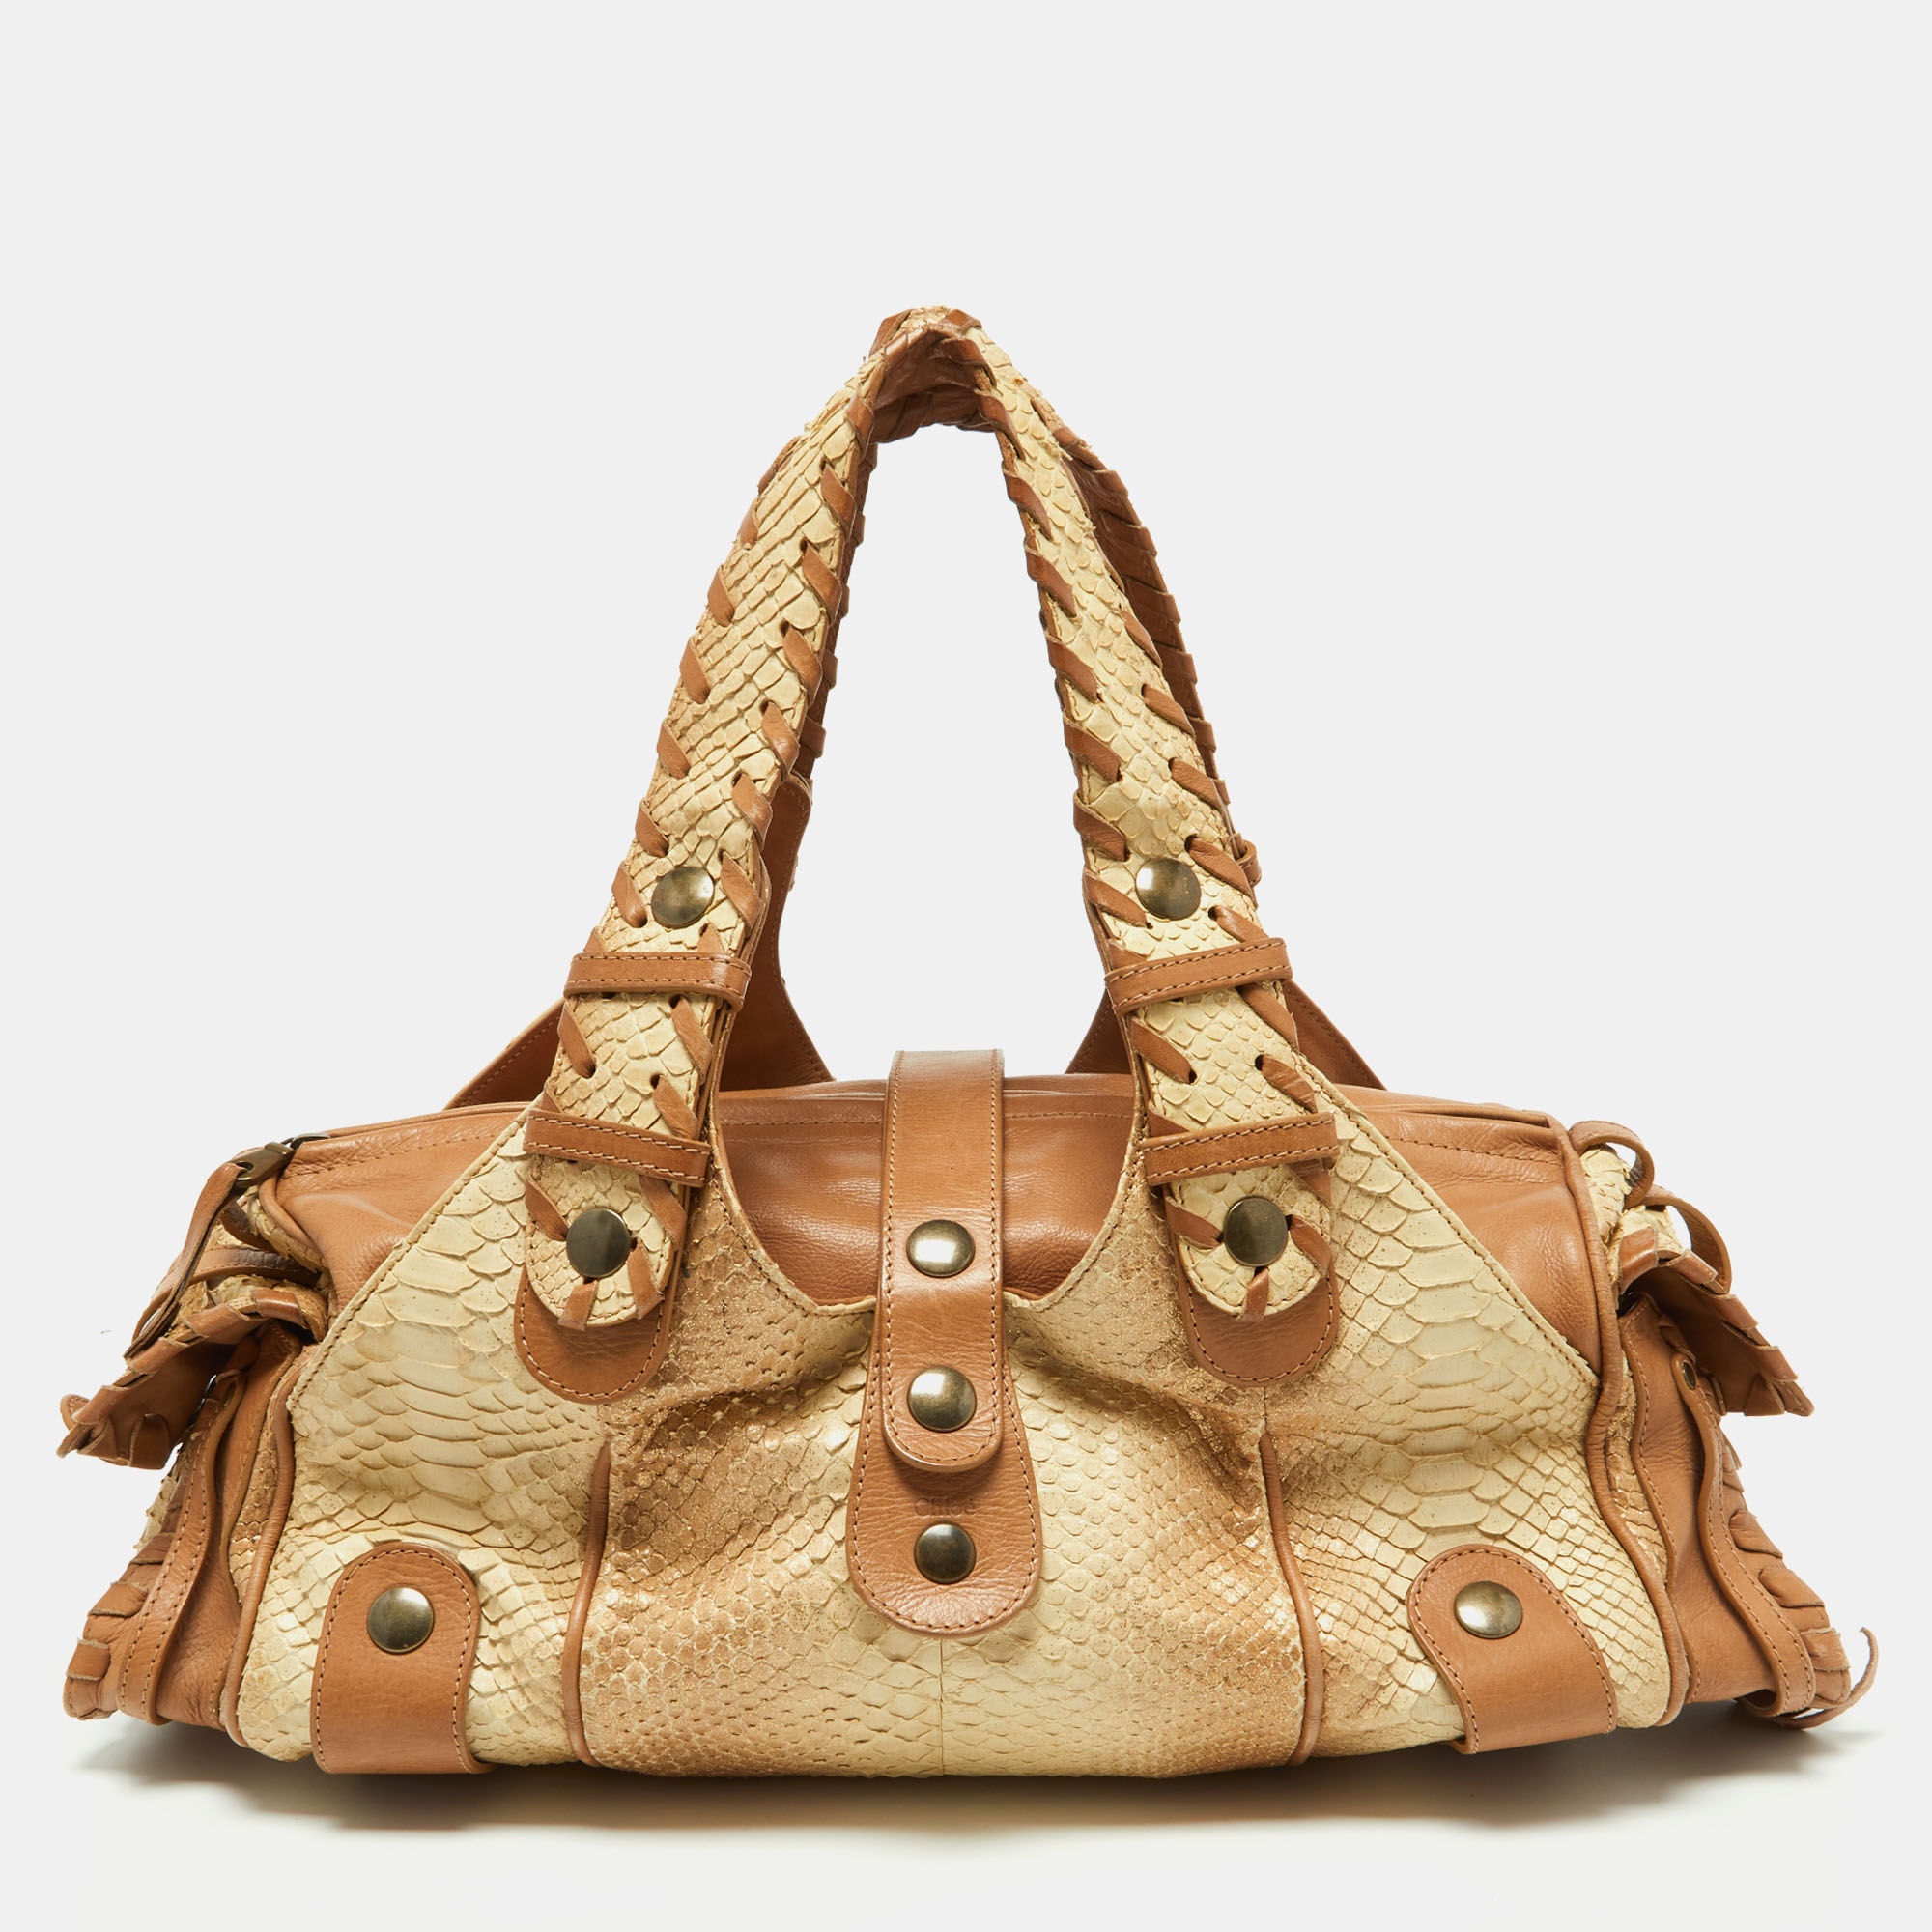 Pre-owned Chloé Beige/brown Glittery Python And Leather Silverado Satchel